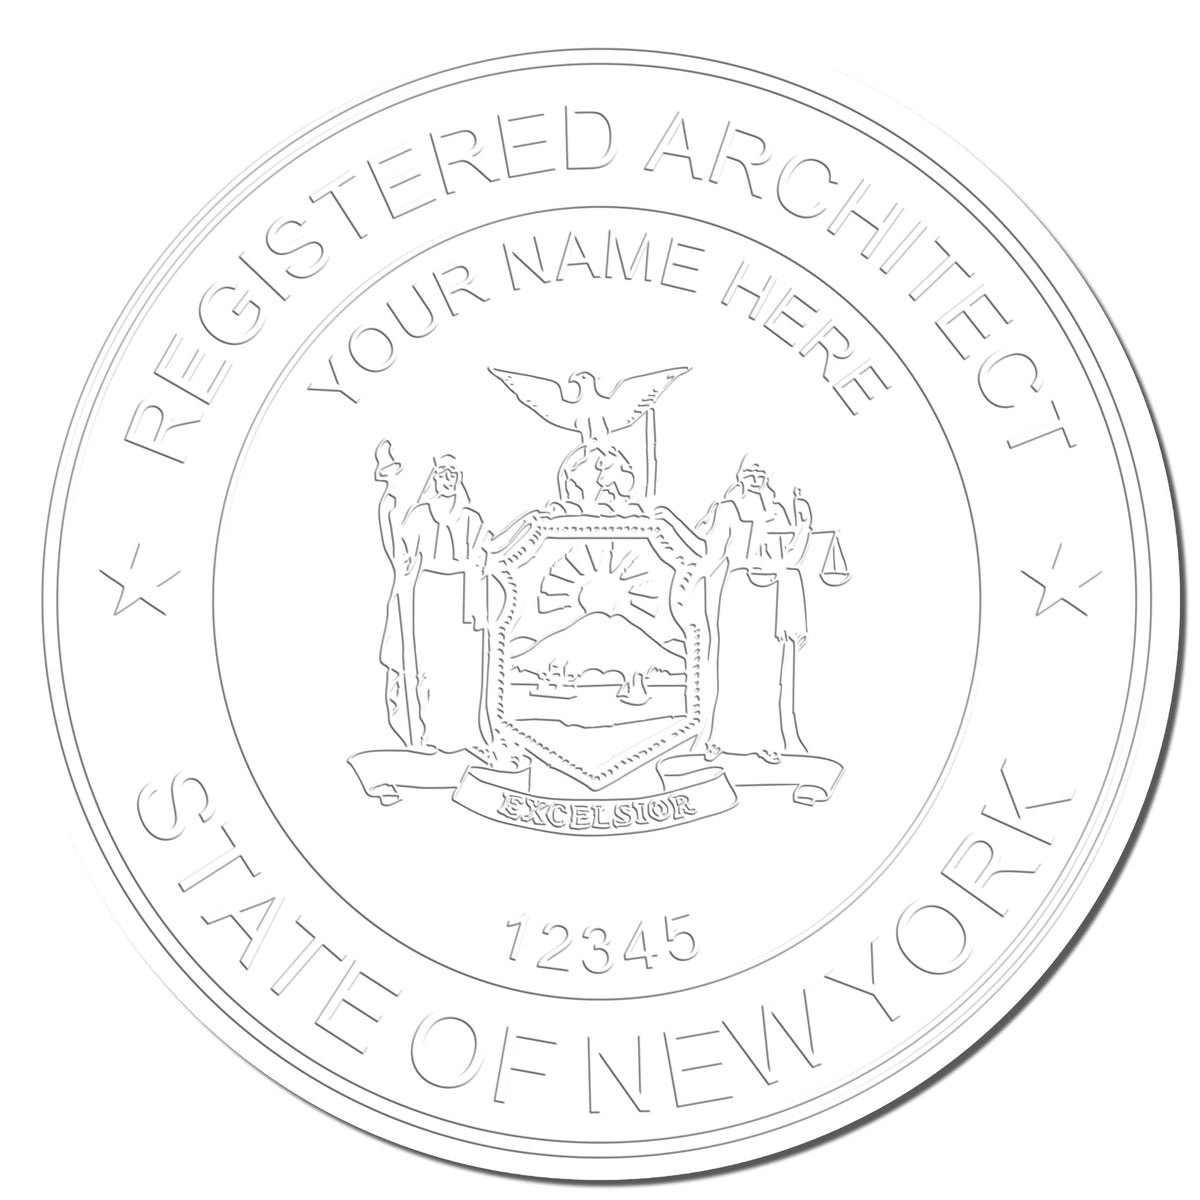 This paper is stamped with a sample imprint of the Heavy Duty Cast Iron New York Architect Embosser, signifying its quality and reliability.